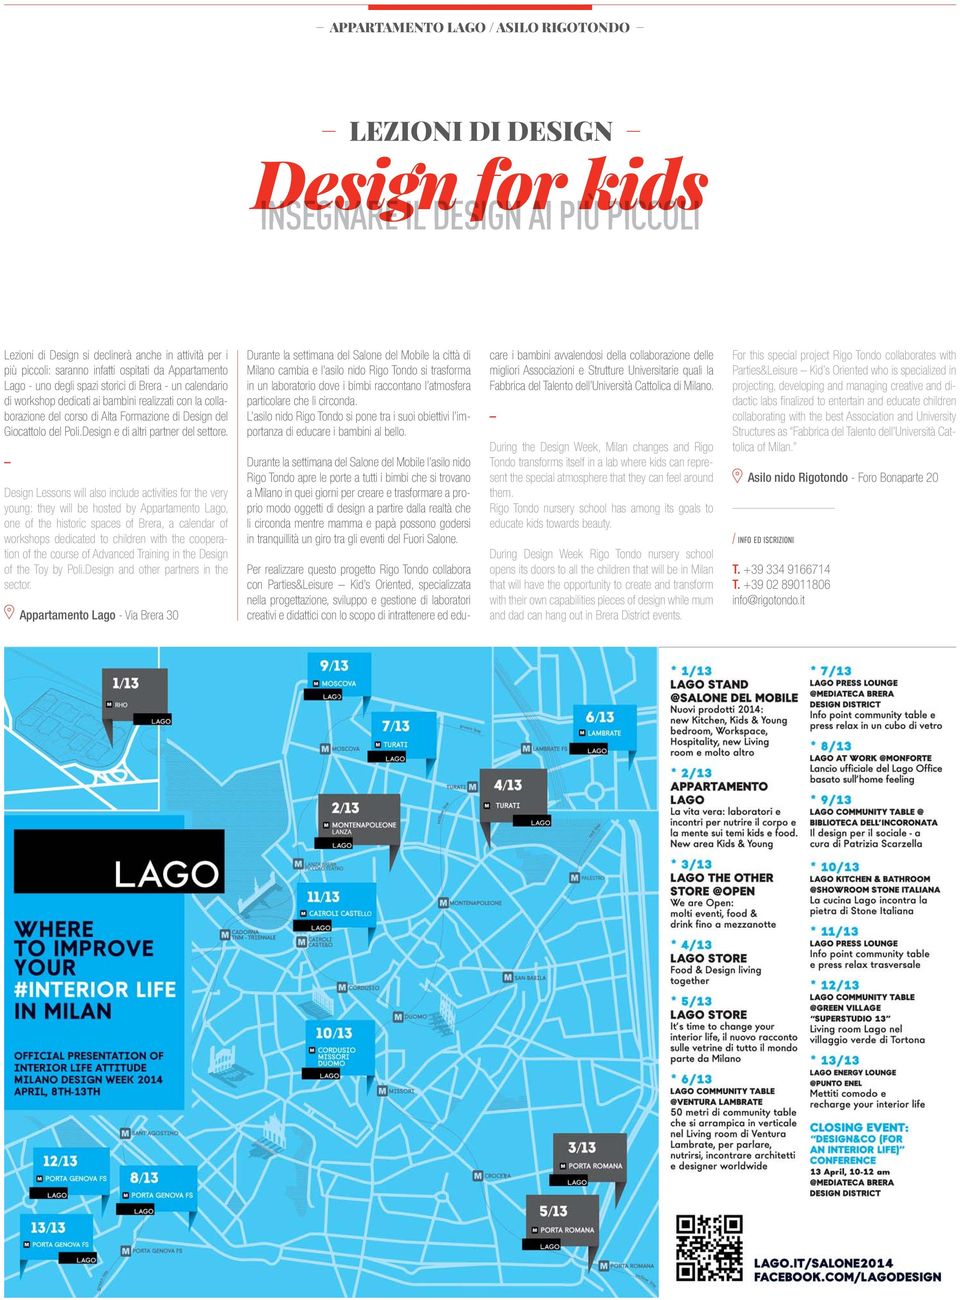 Design Lessons will also include activities for the very young: they will be hosted by Appartamento Lago, one of the historic spaces of Brera, a calendar of workshops dedicated to children with the